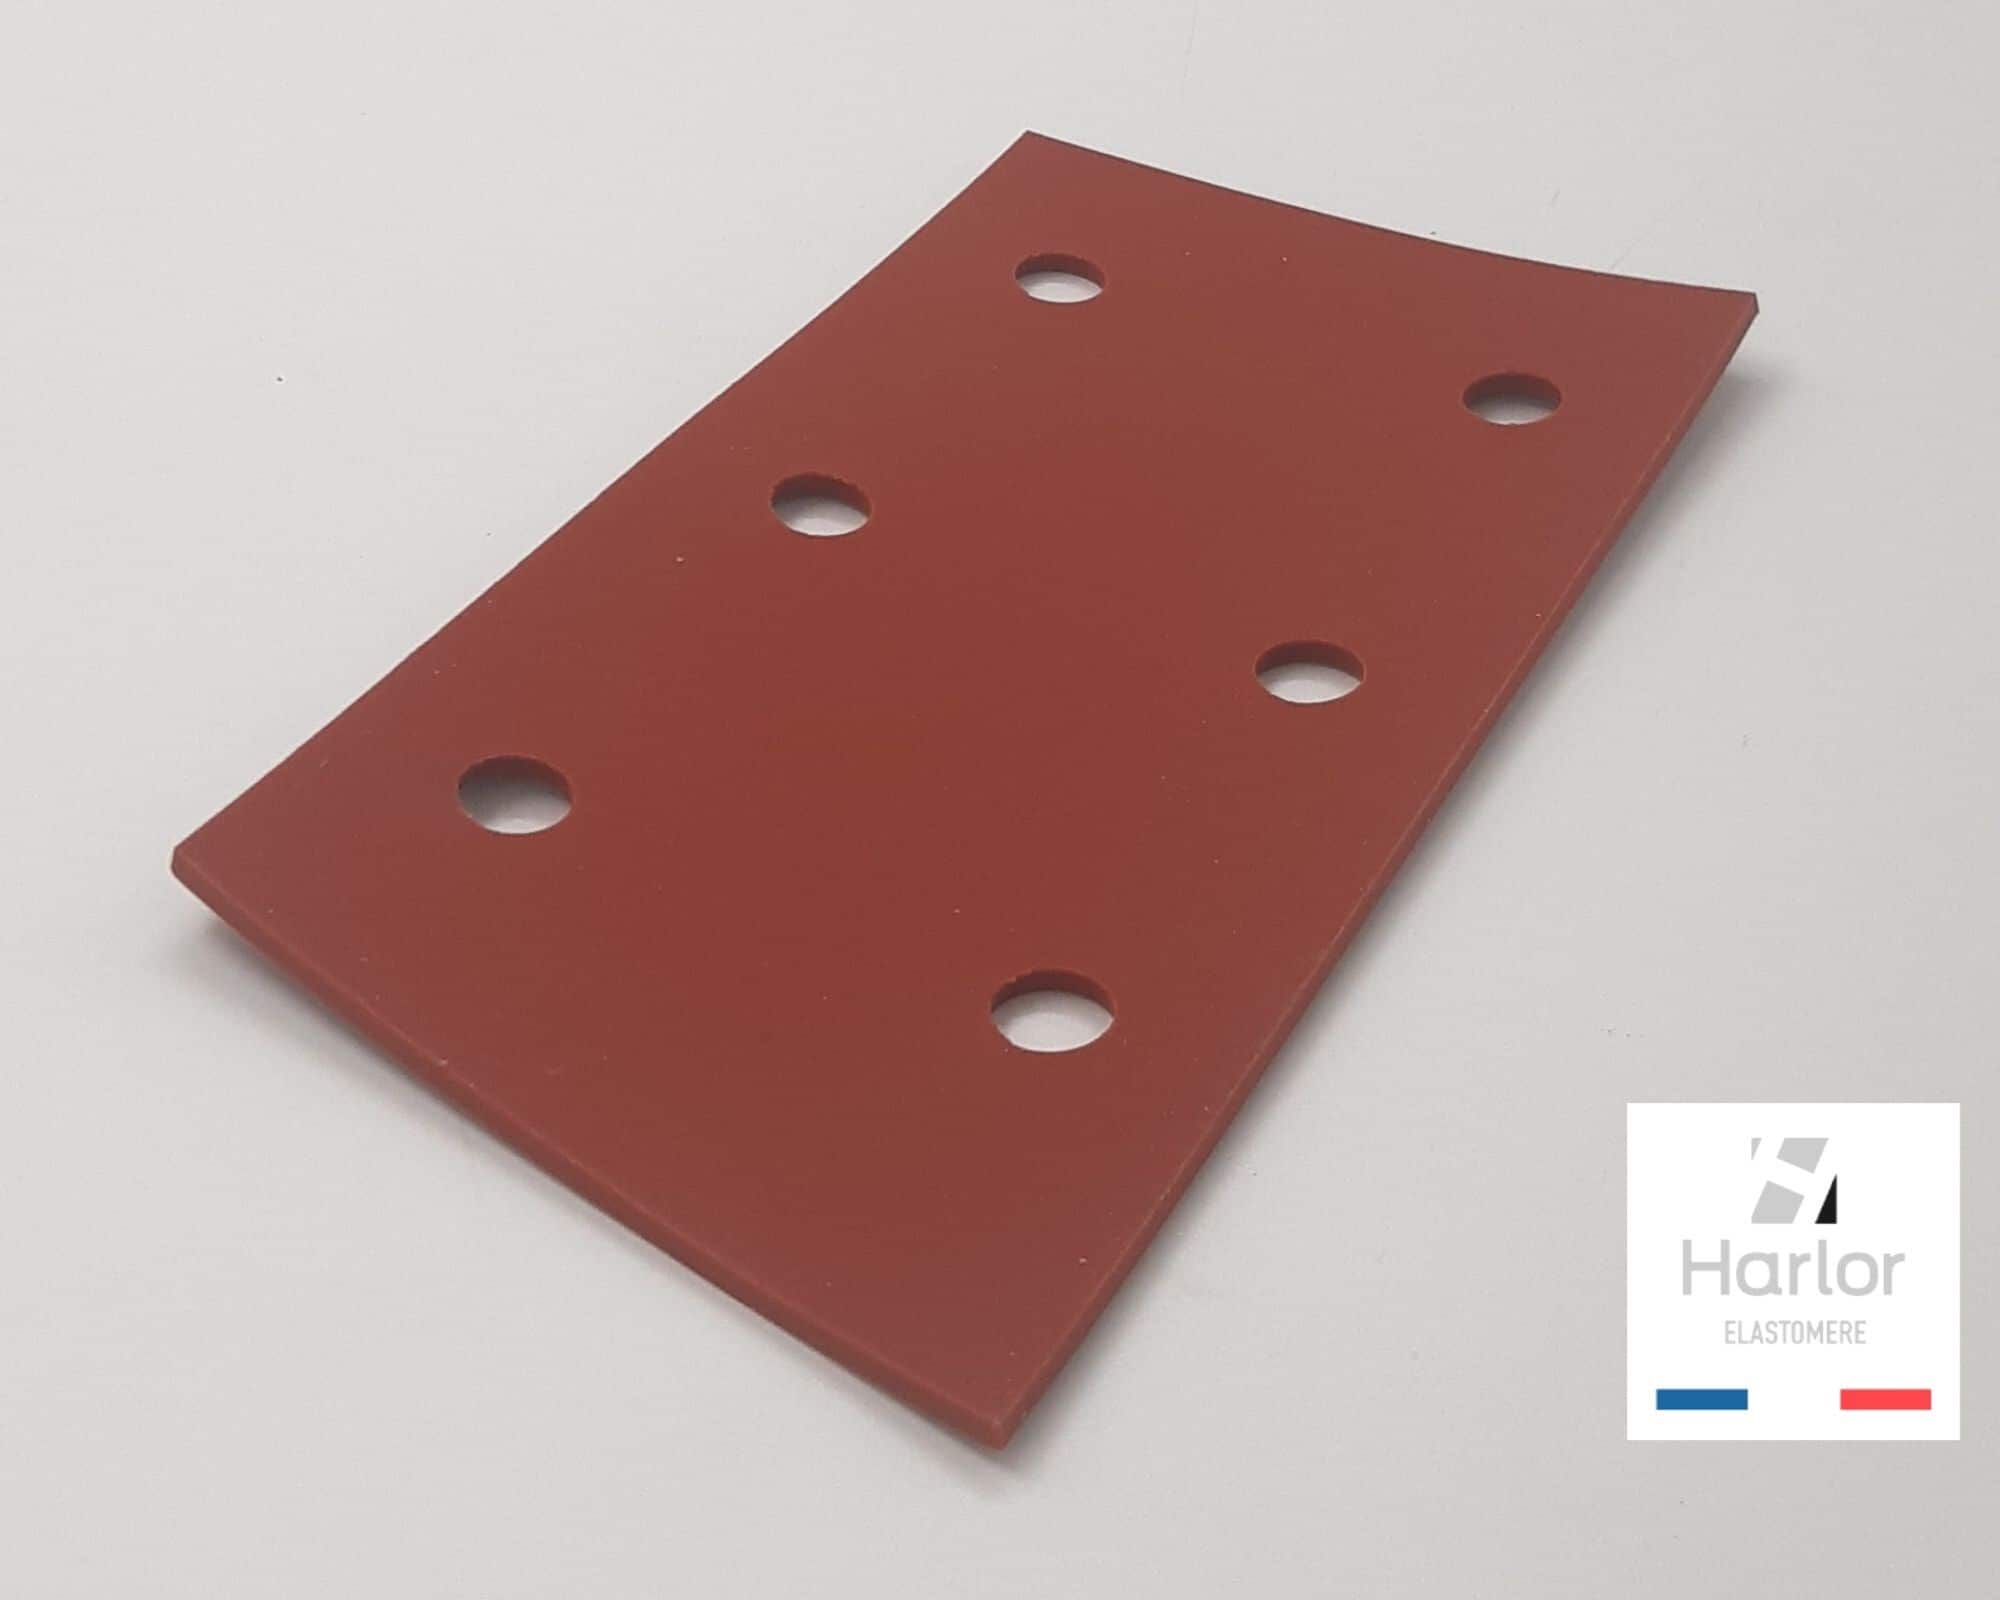 HARLOR ELASTOMERE - JOINT SILICONE ROUGE